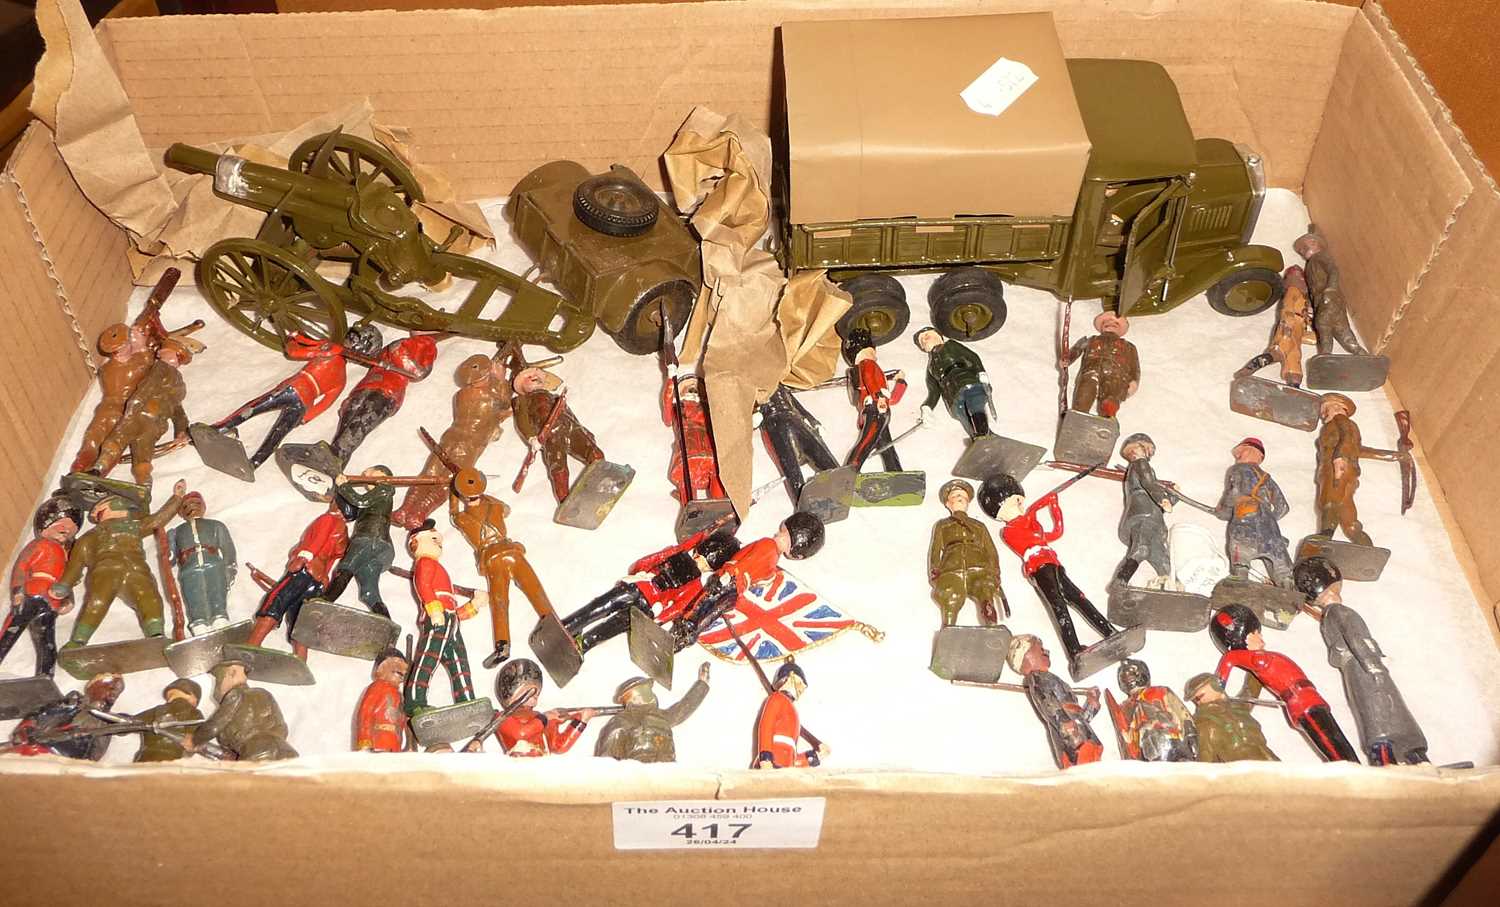 40 Britains diecast soldiers, inc. 10 wheel army lorry, gun and lumber